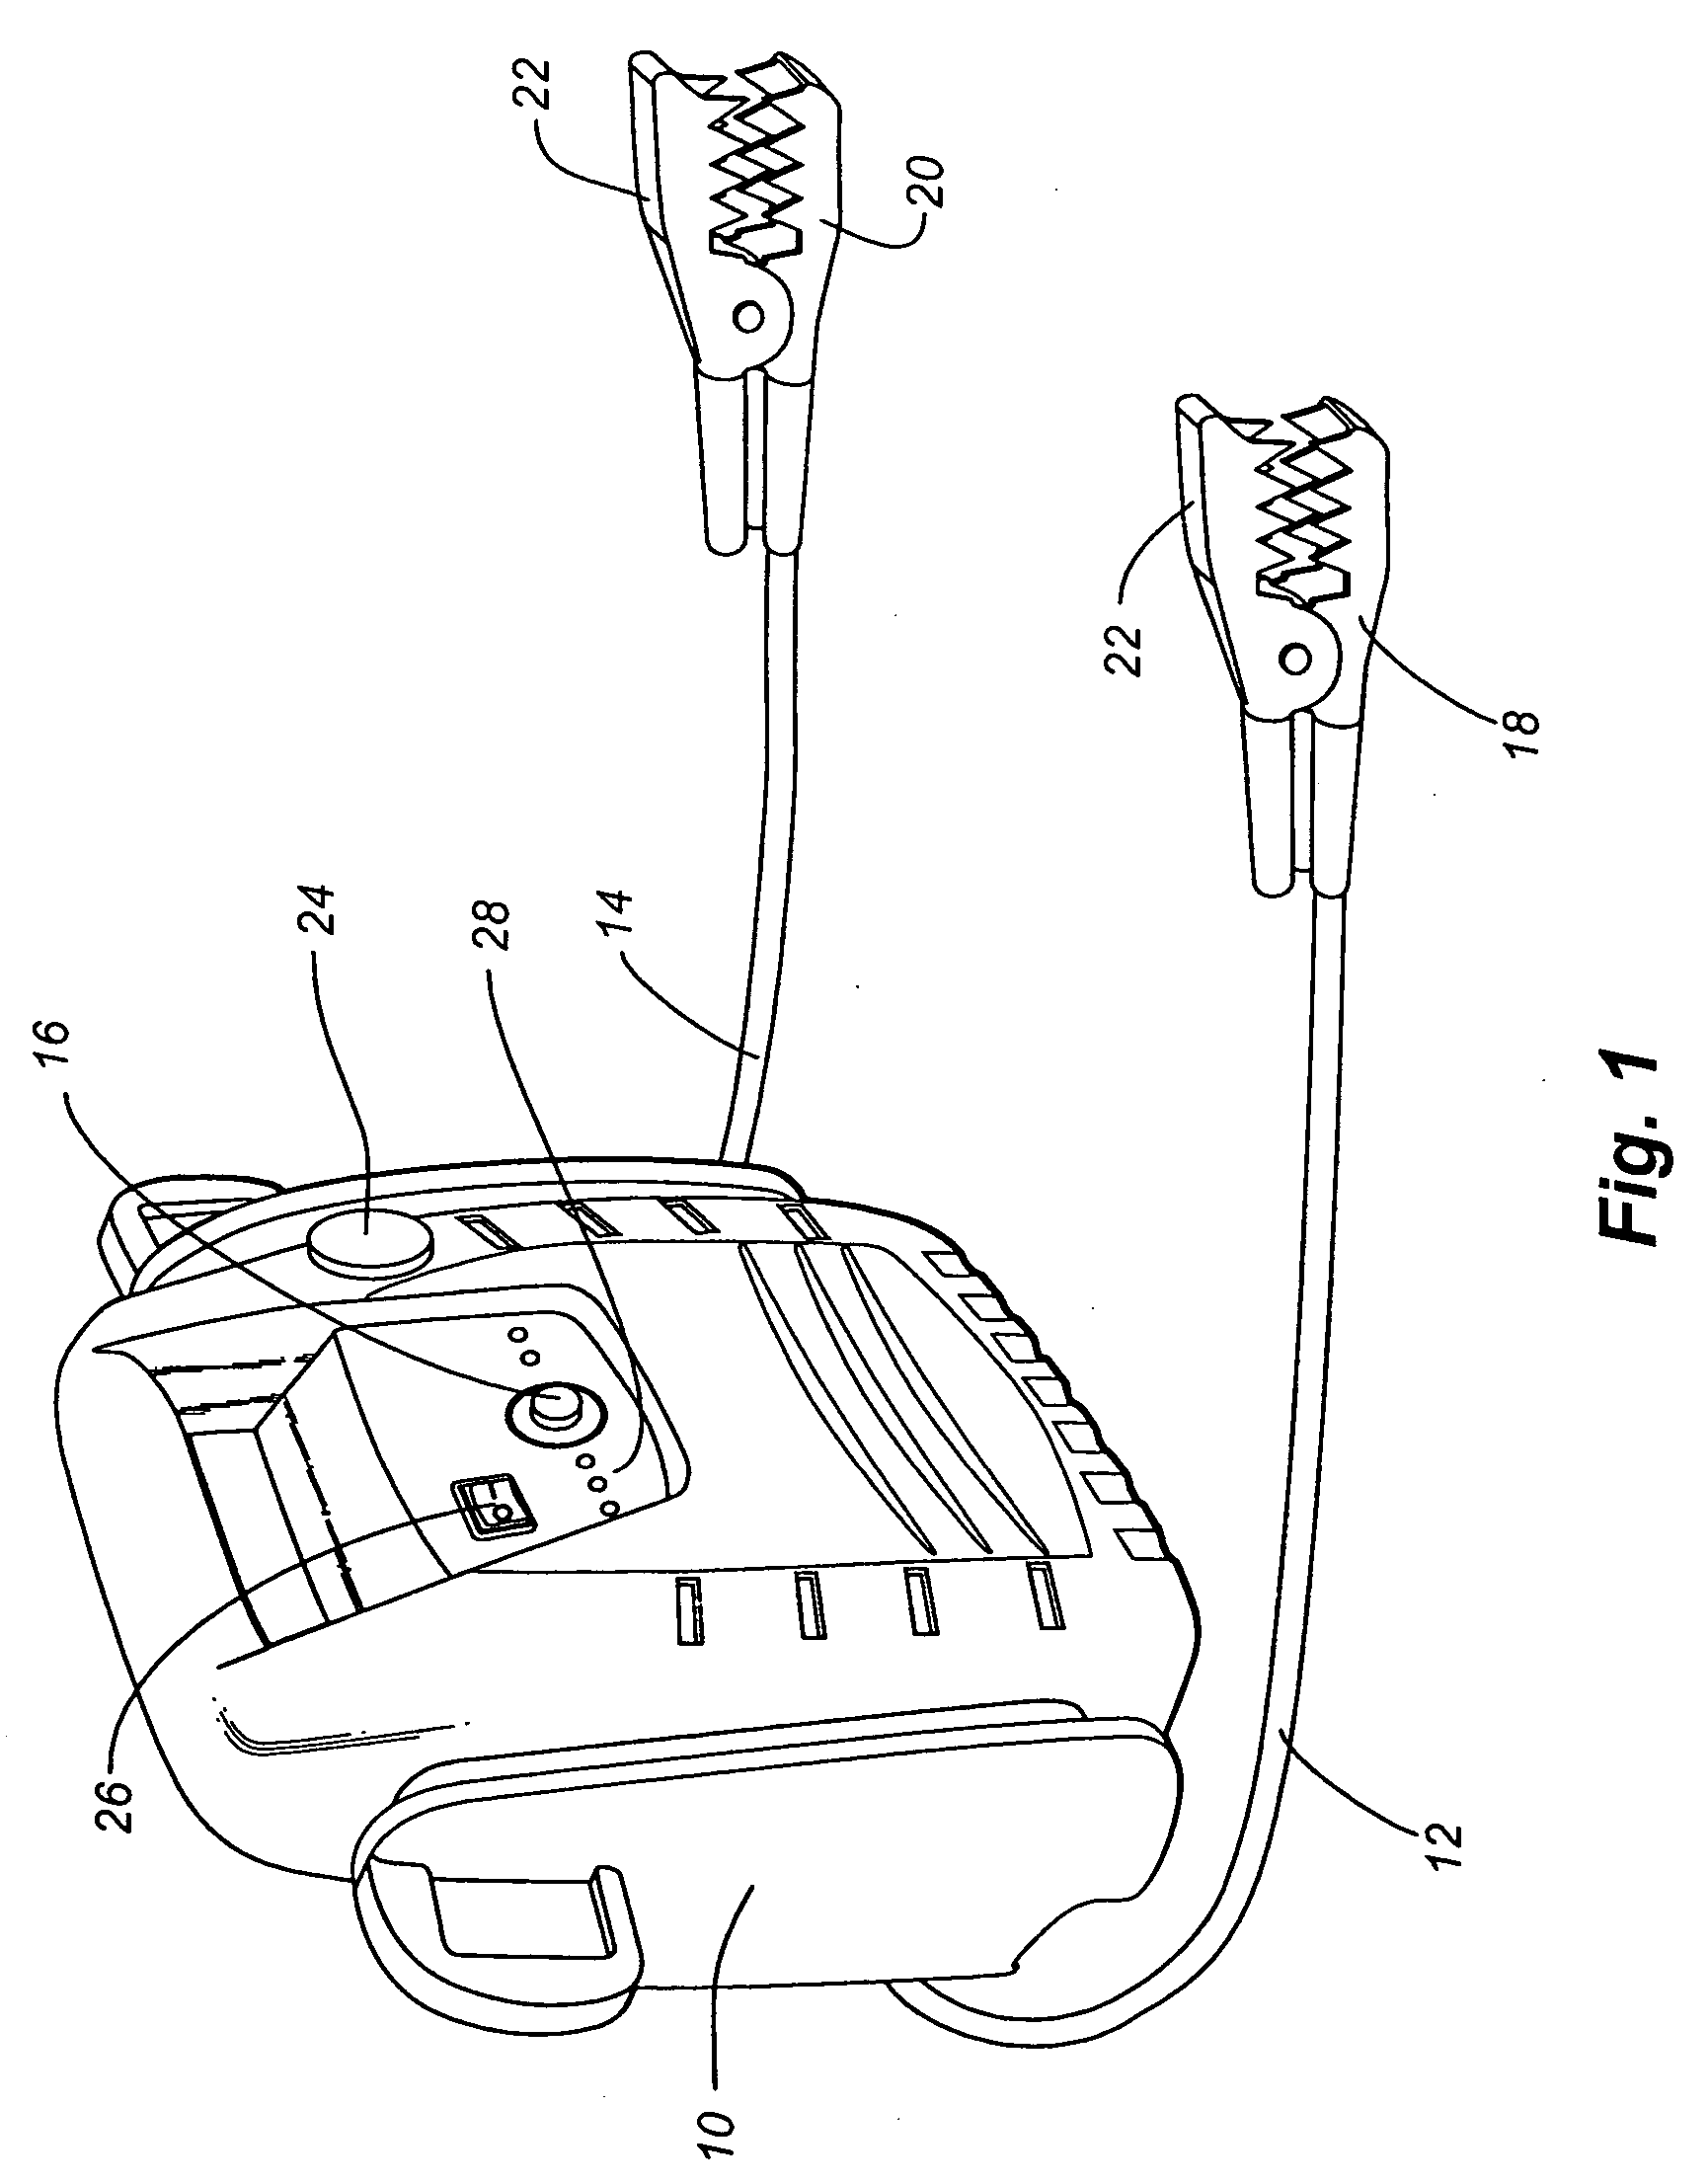 Automotive jump starter with polarity detection and current routing circuitry